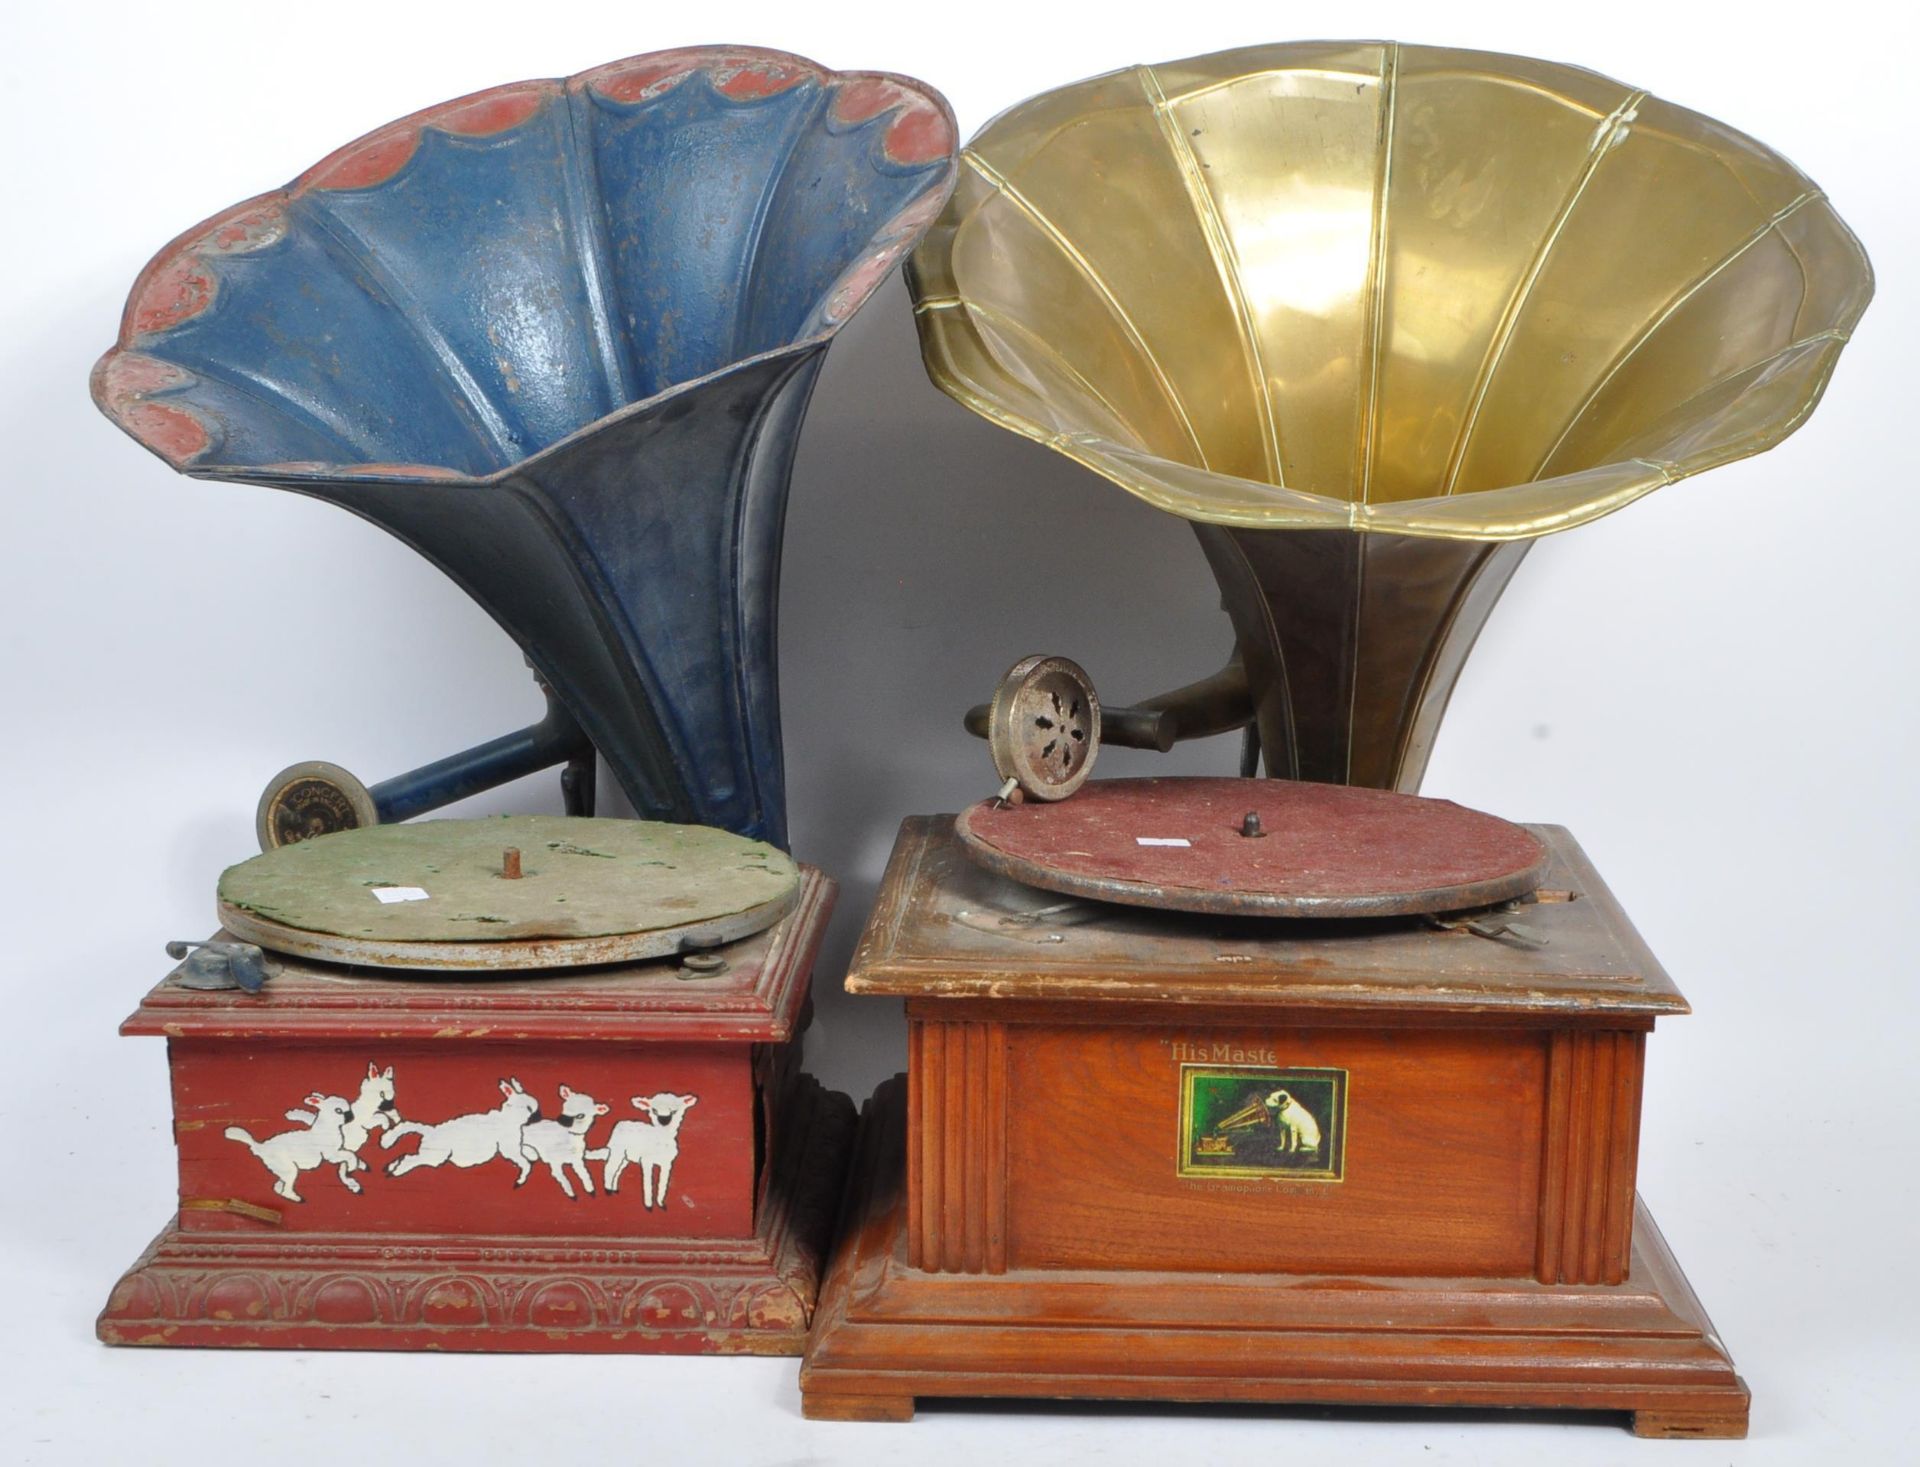 TWO EARLY 20TH CENTURY GRAMOPHONES WITH HORNS - DULCEPHONE